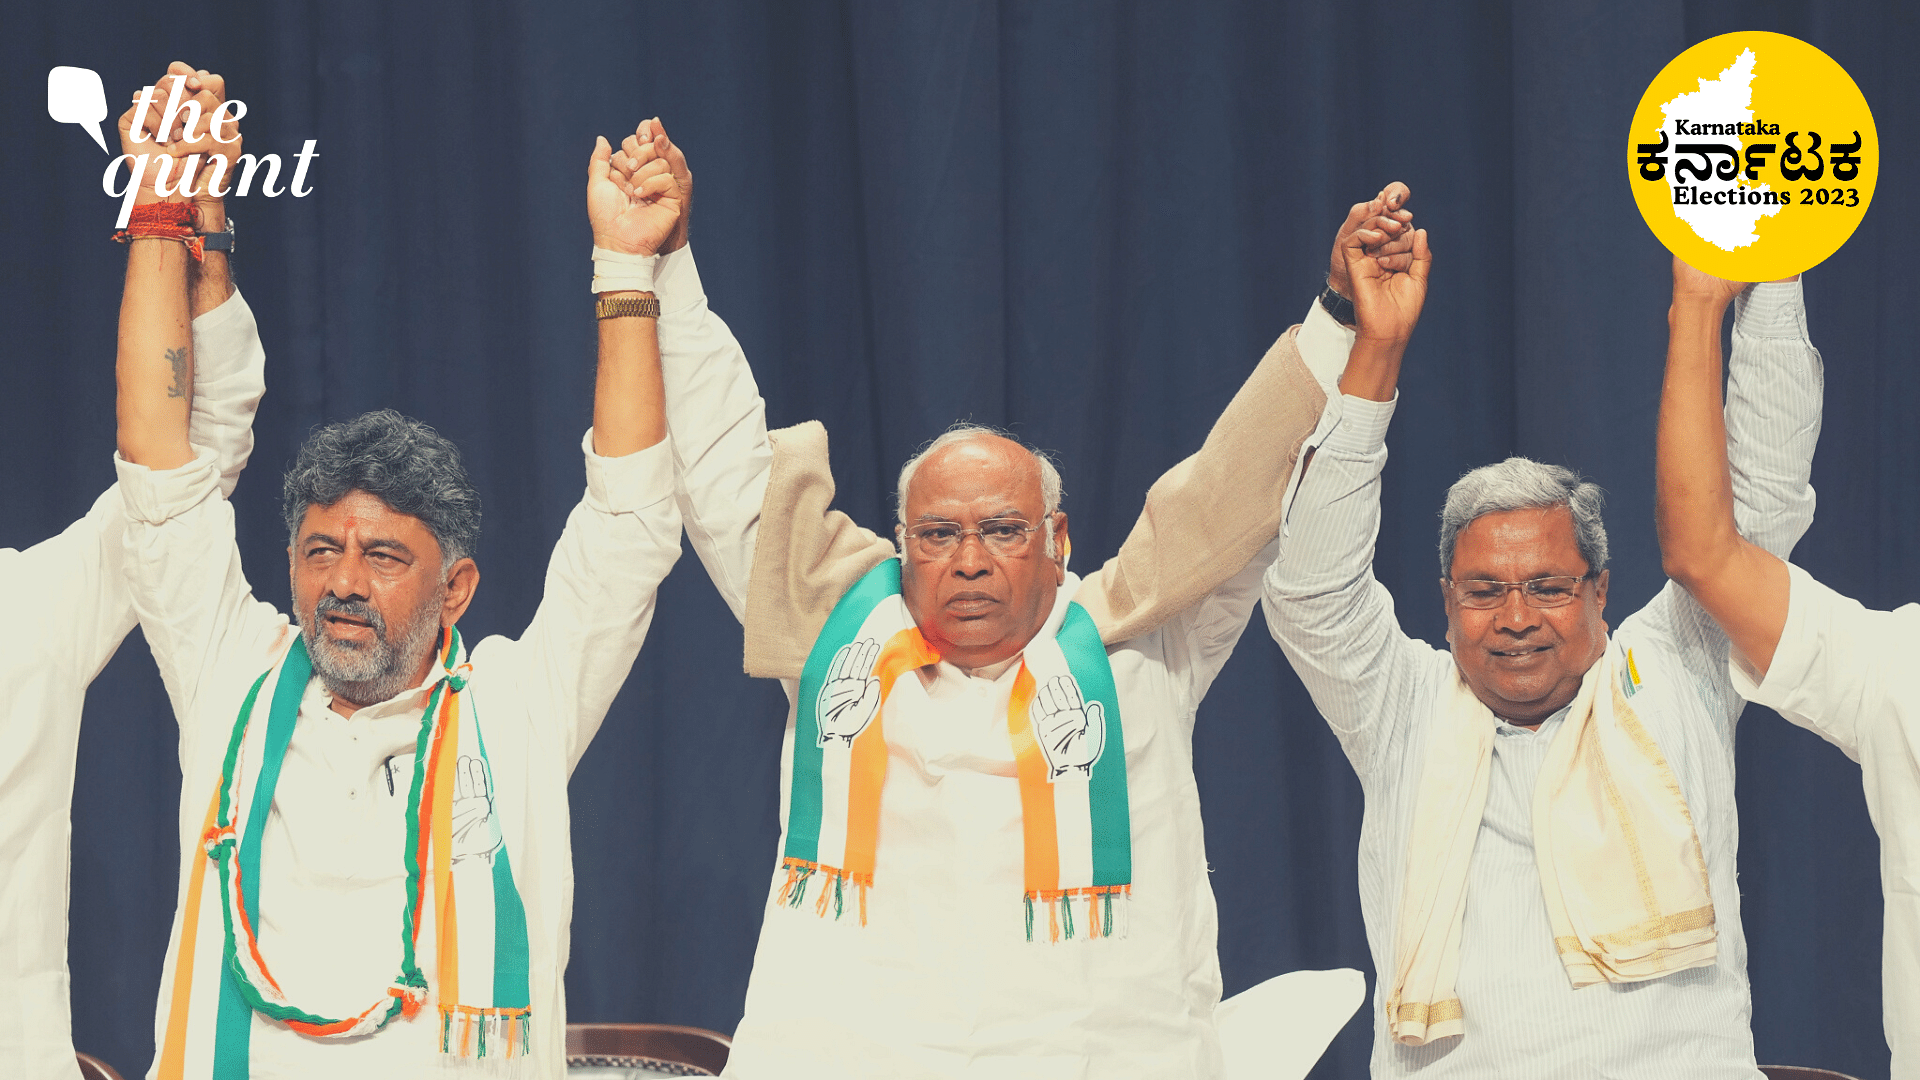 <div class="paragraphs"><p>Congress President Mallikarjun Kharge with former Karnataka CM Siddaramaiah and Karnataka Congress President DK Shivakumar during celebrations after the party's win in Karnataka Assembly elections, in Bengaluru.</p></div>